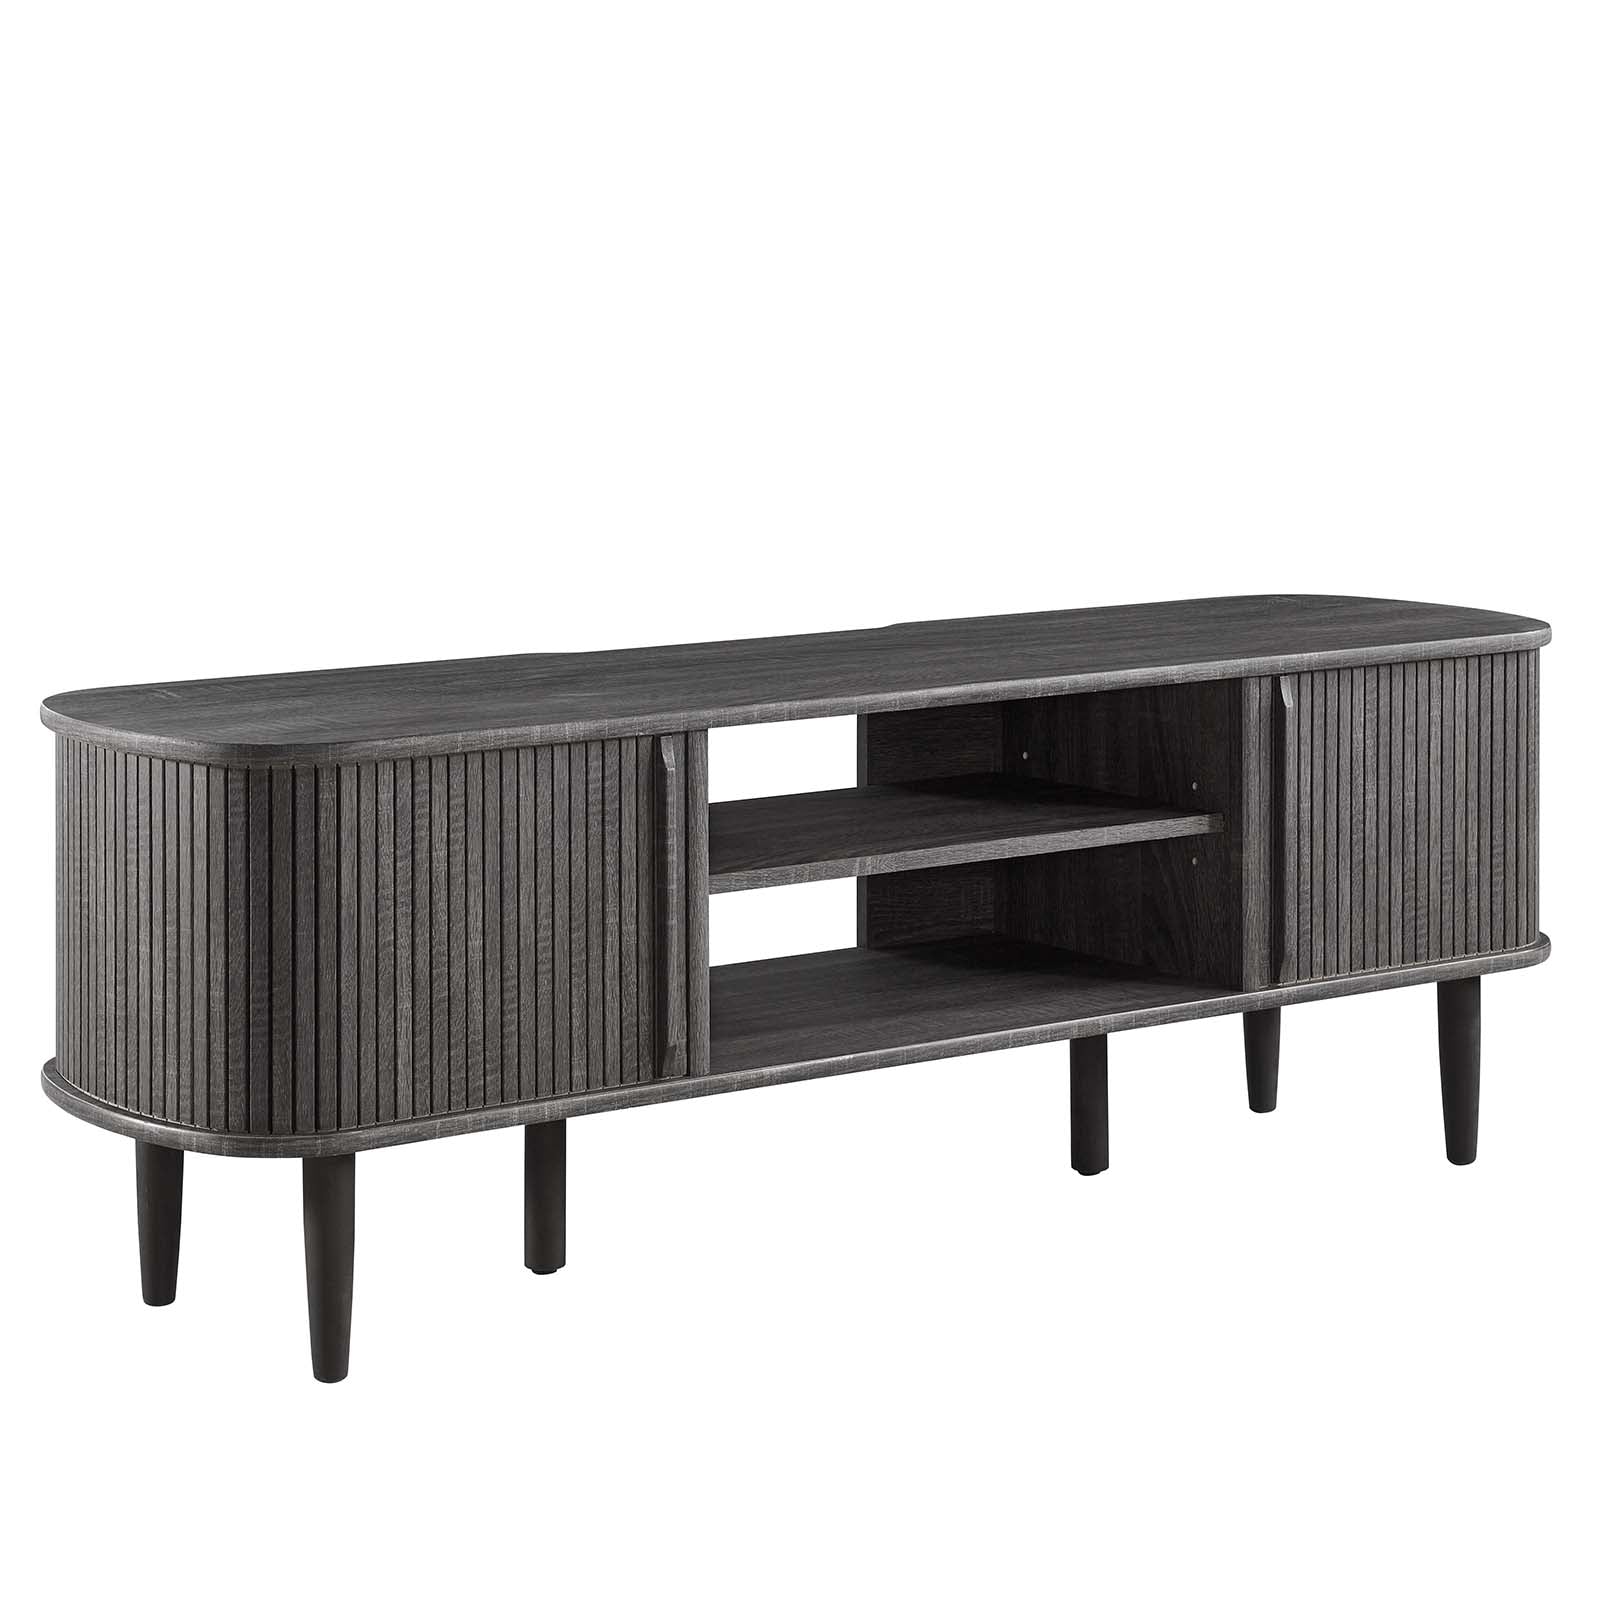 Contour 55" TV Stand - East Shore Modern Home Furnishings